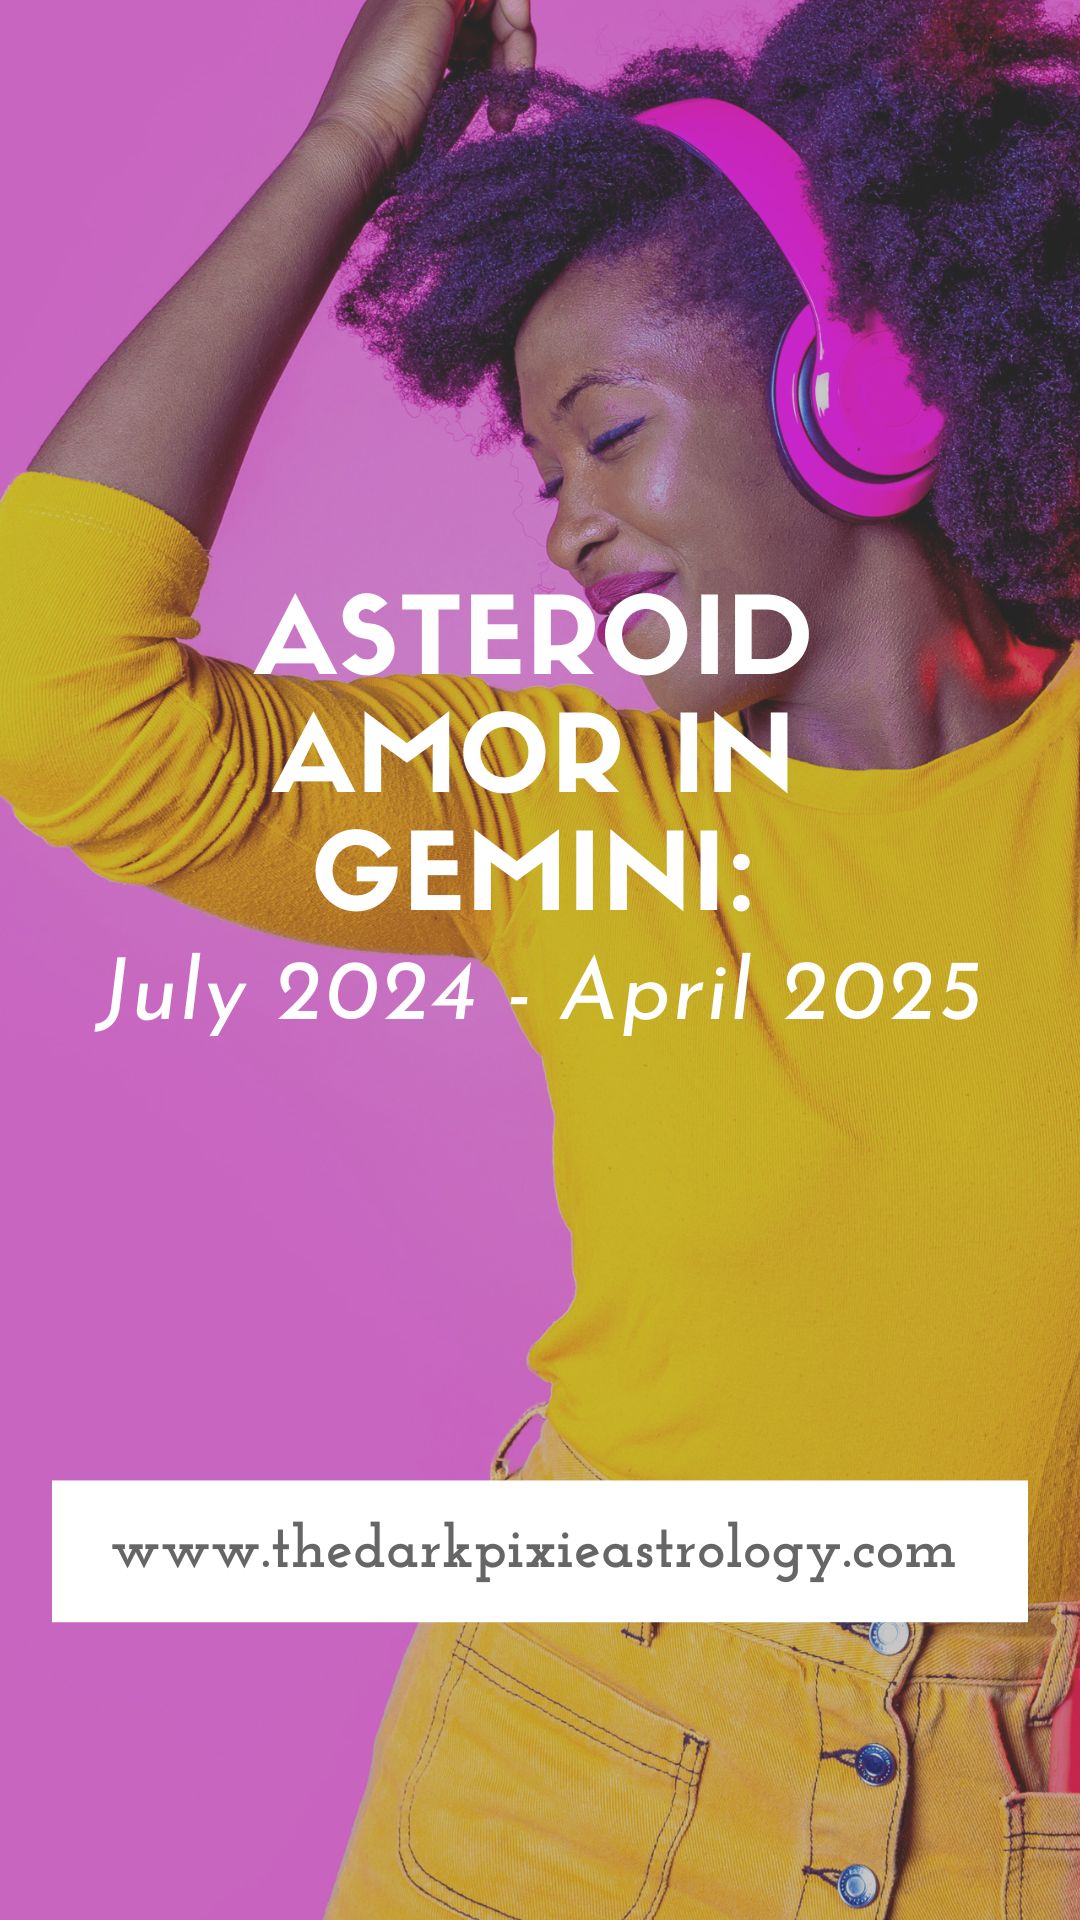 Asteroid Amor in Gemini: July 2024 - April 2025 - The Dark Pixie Astrology